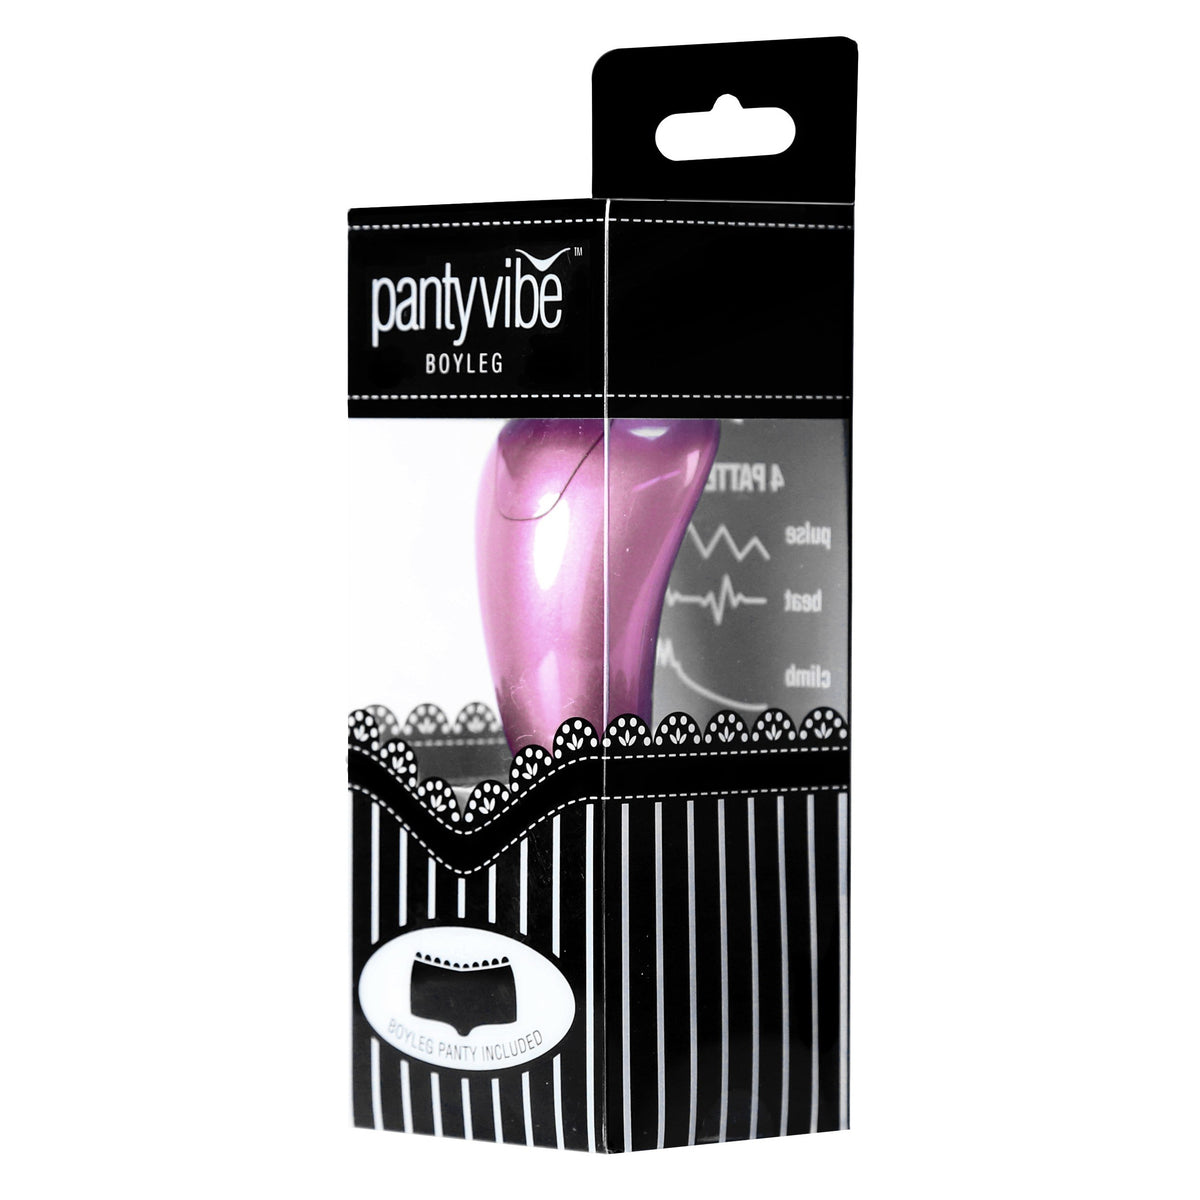 BMS - Panty Vibrator - Battery Operated - Pink - S/M